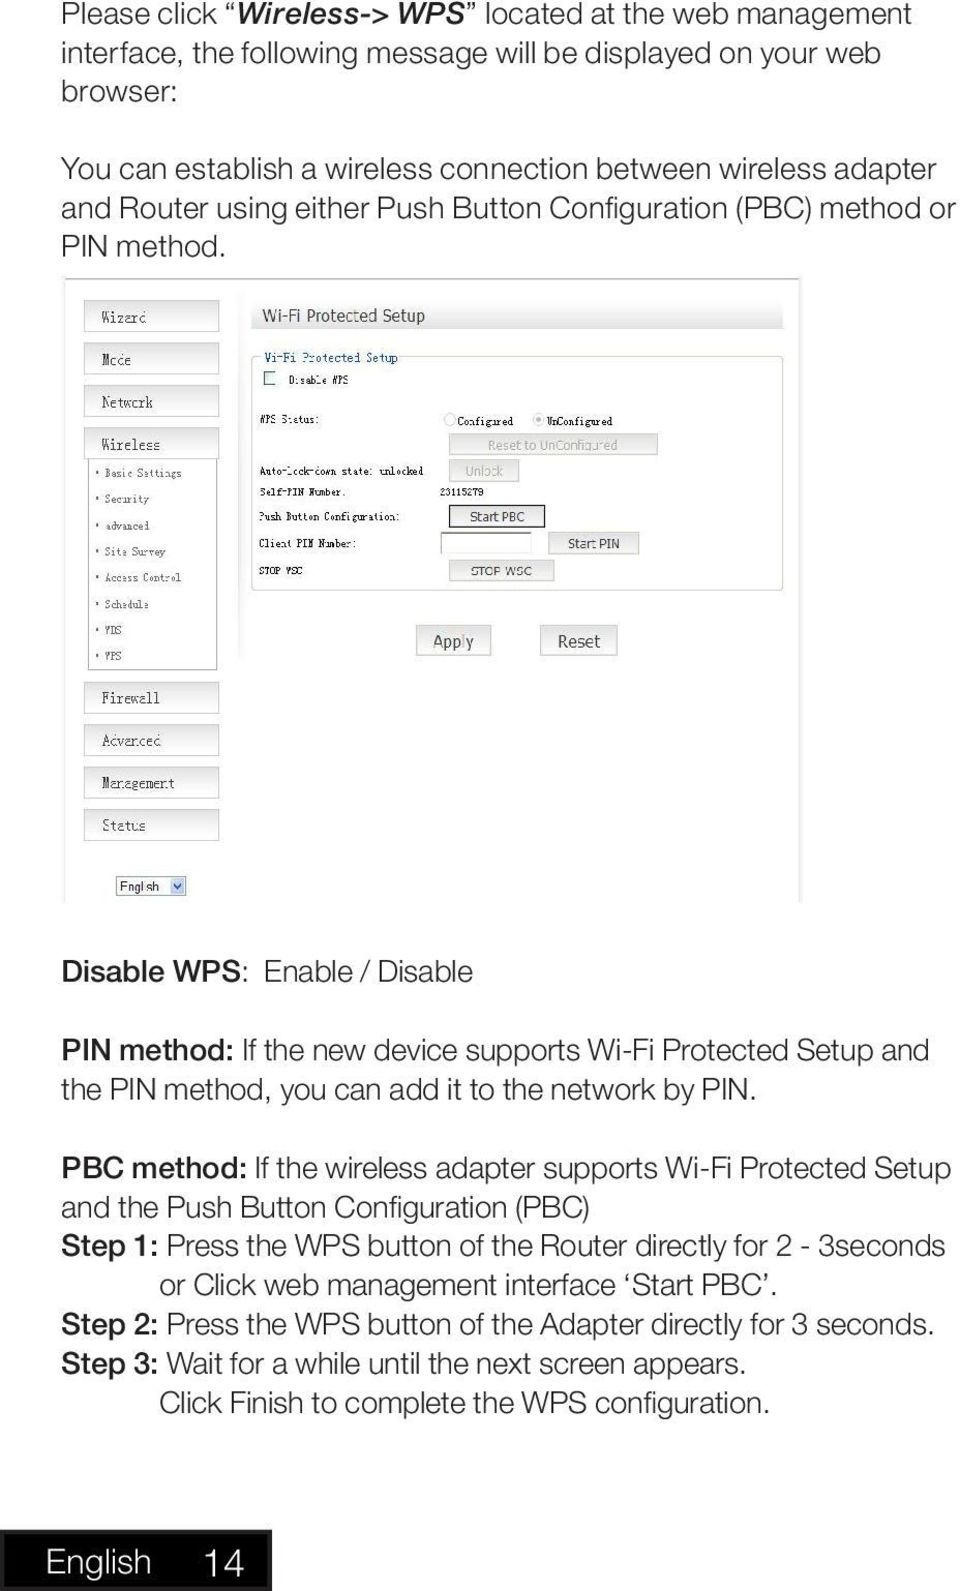 Disable WPS: Enable / Disable PIN method: If the new device supports Wi-Fi Protected Setup and the PIN method, you can add it to the network by PIN.